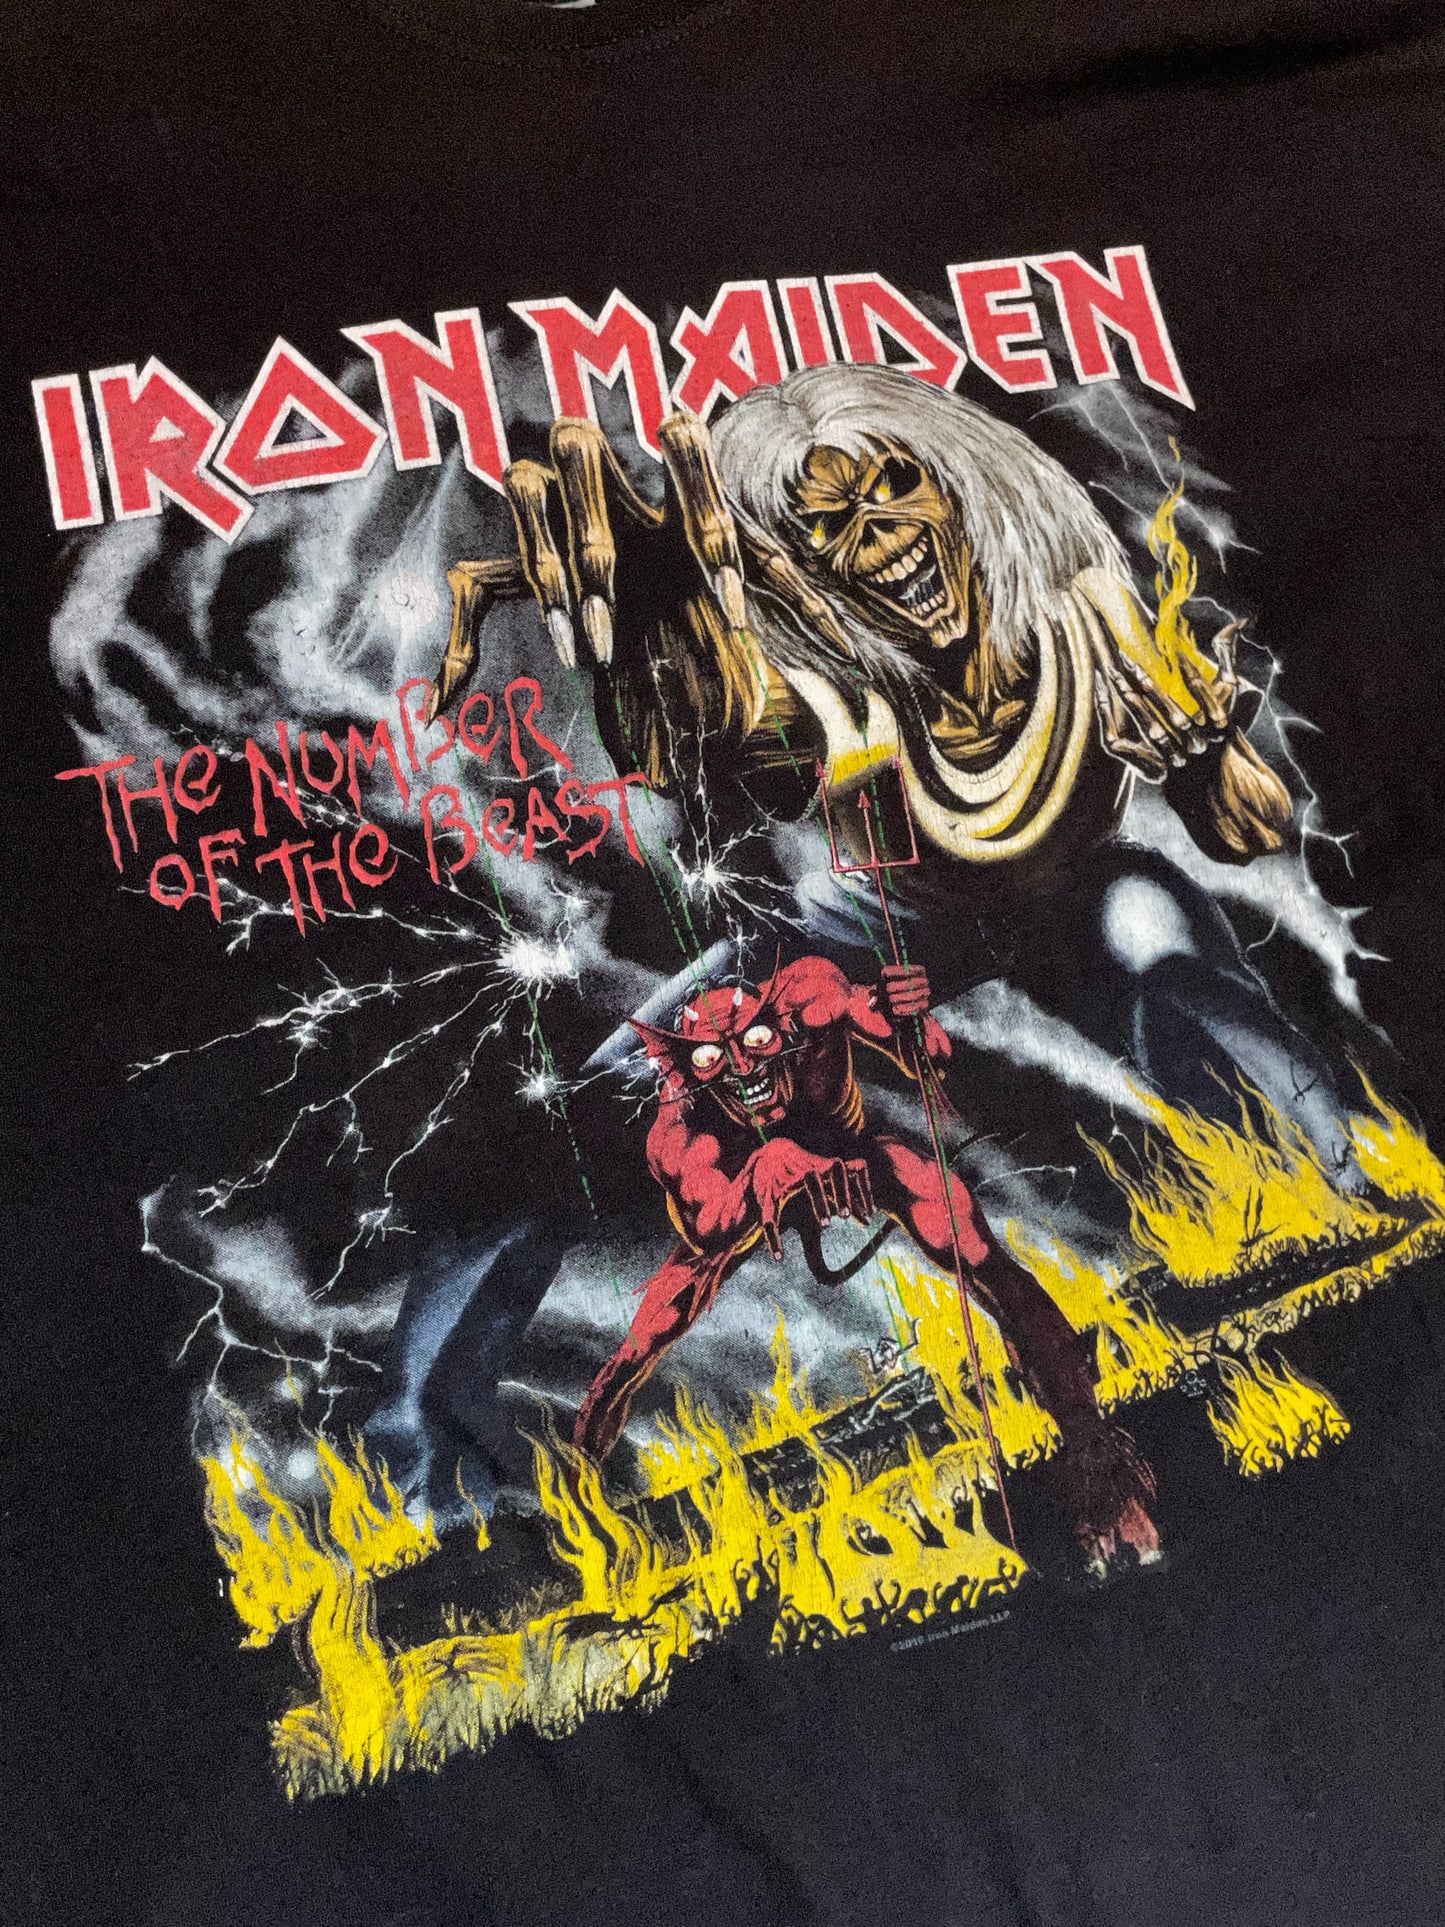 IRON MAIDEN "THE NUMBER OF THE BEAST" 2010 MUSIC BAND T-SHIRT  SZ: XXL